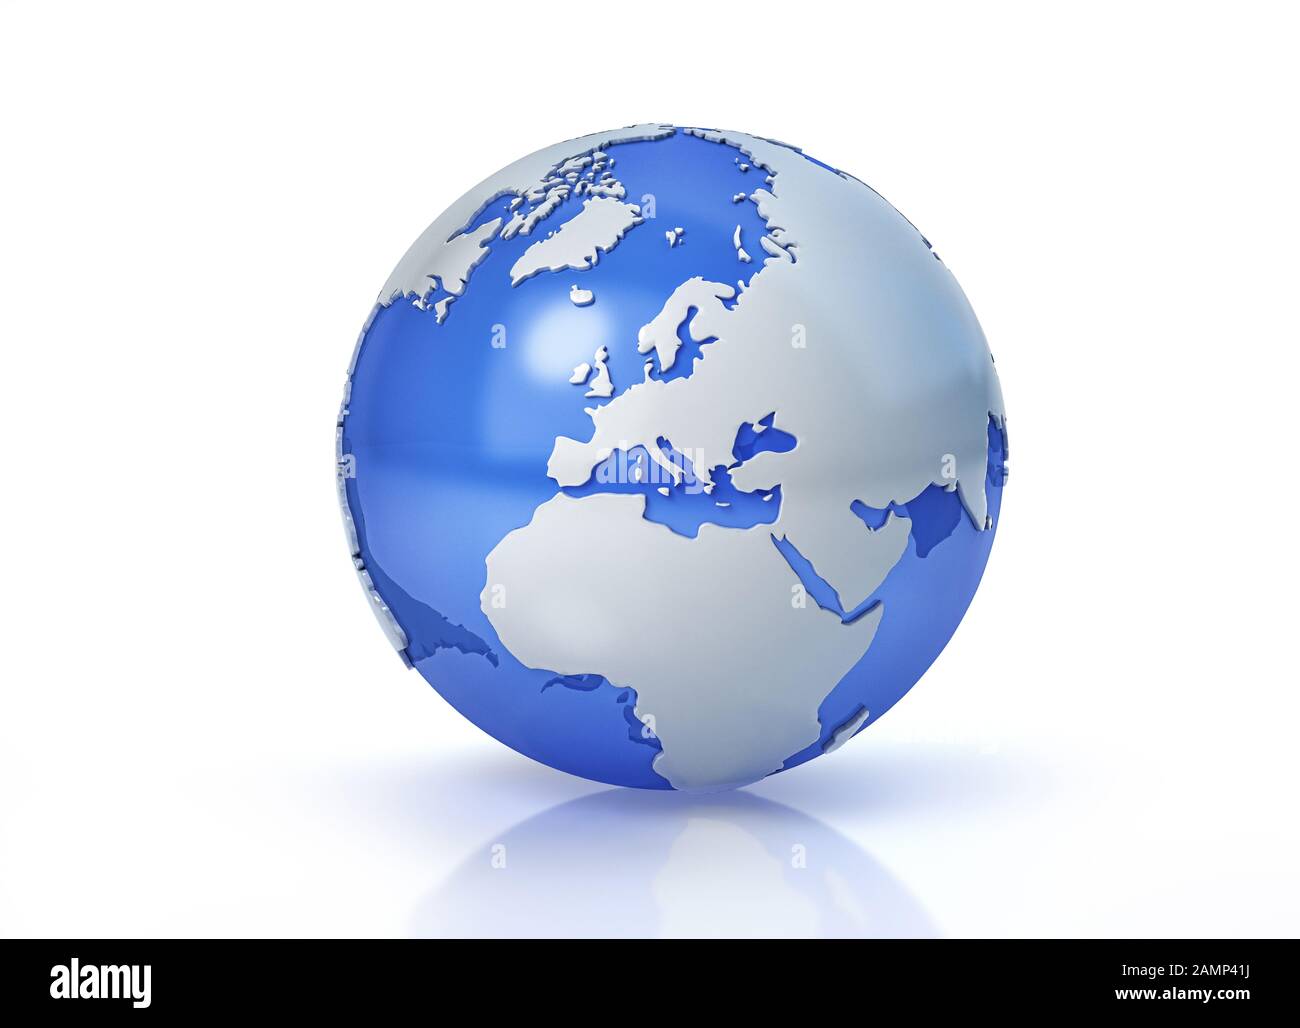 Earth globe stylized. Grey continents in relief. With transparent seas to reveal continents on the other side. On white background. Europe view. Stock Photo